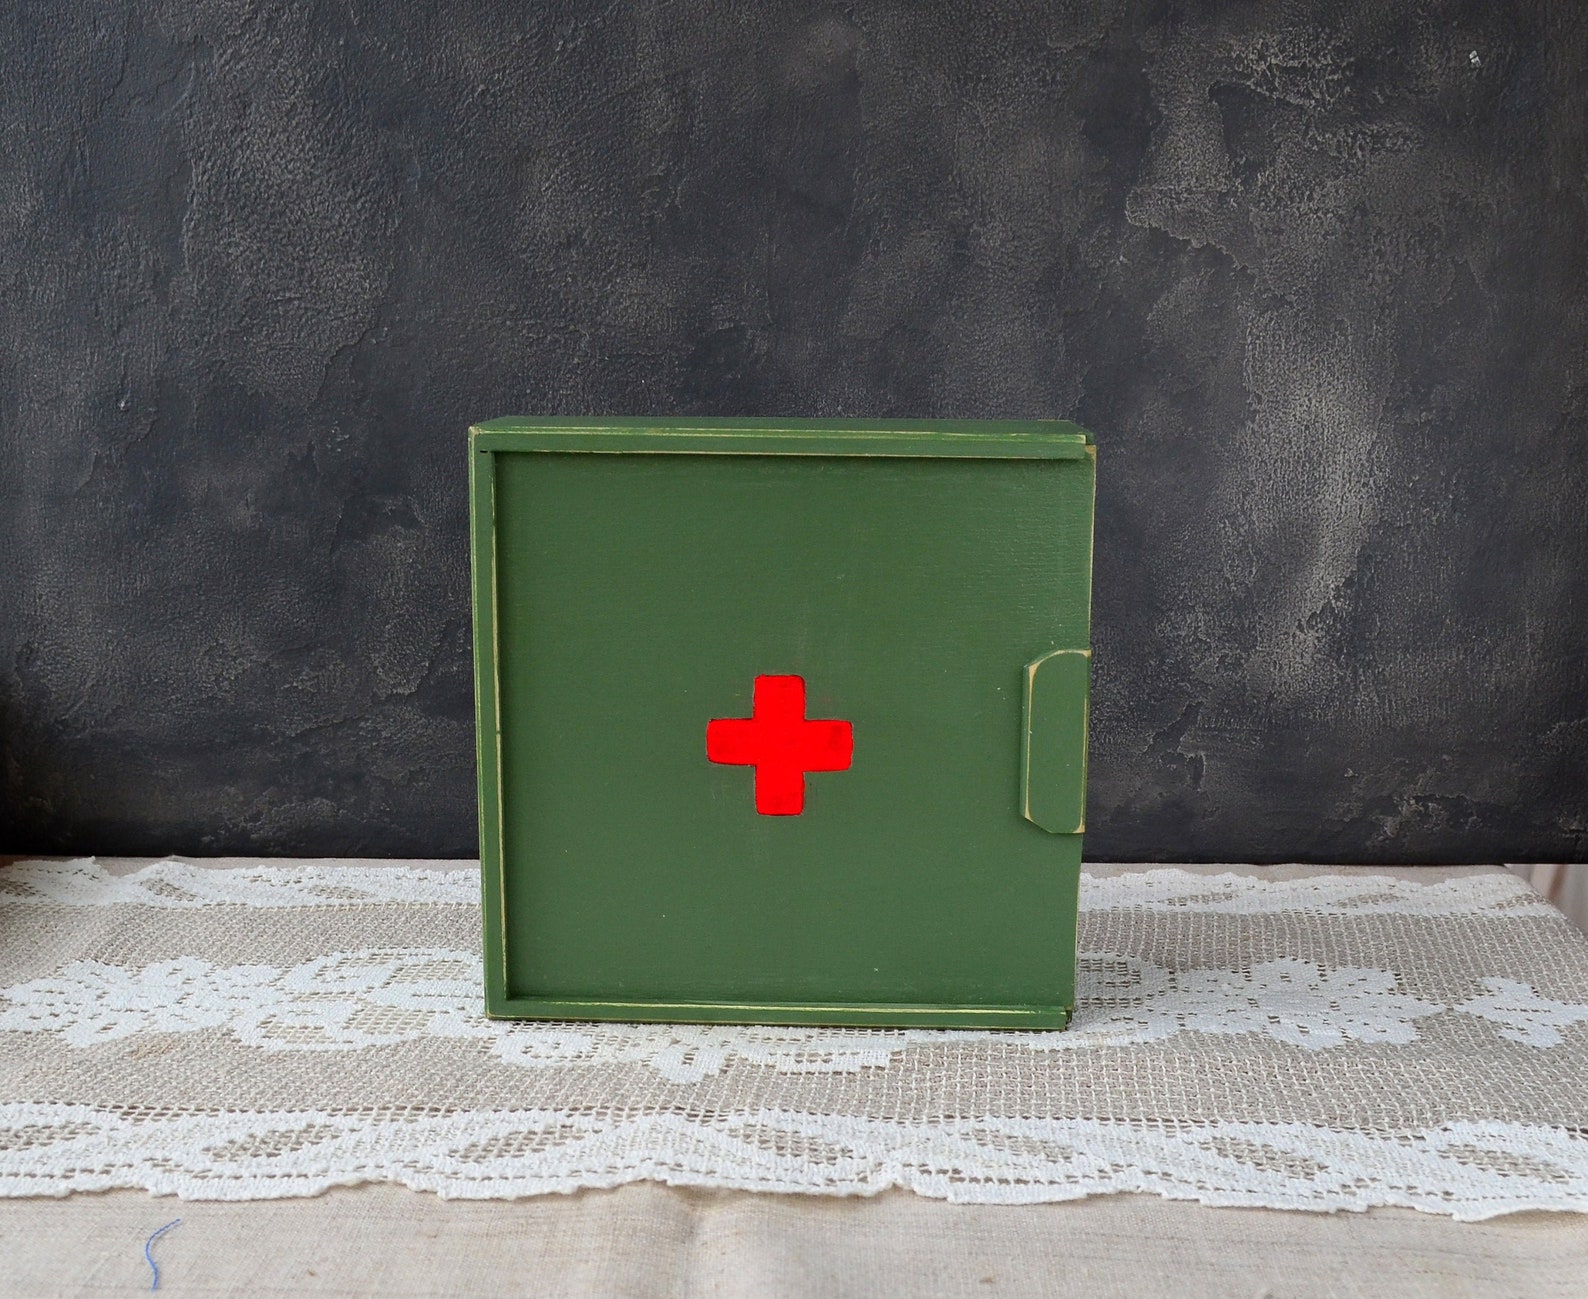 The Wood First Aid Box is $64.35 from LittleShopofDecorUA on Etsy.